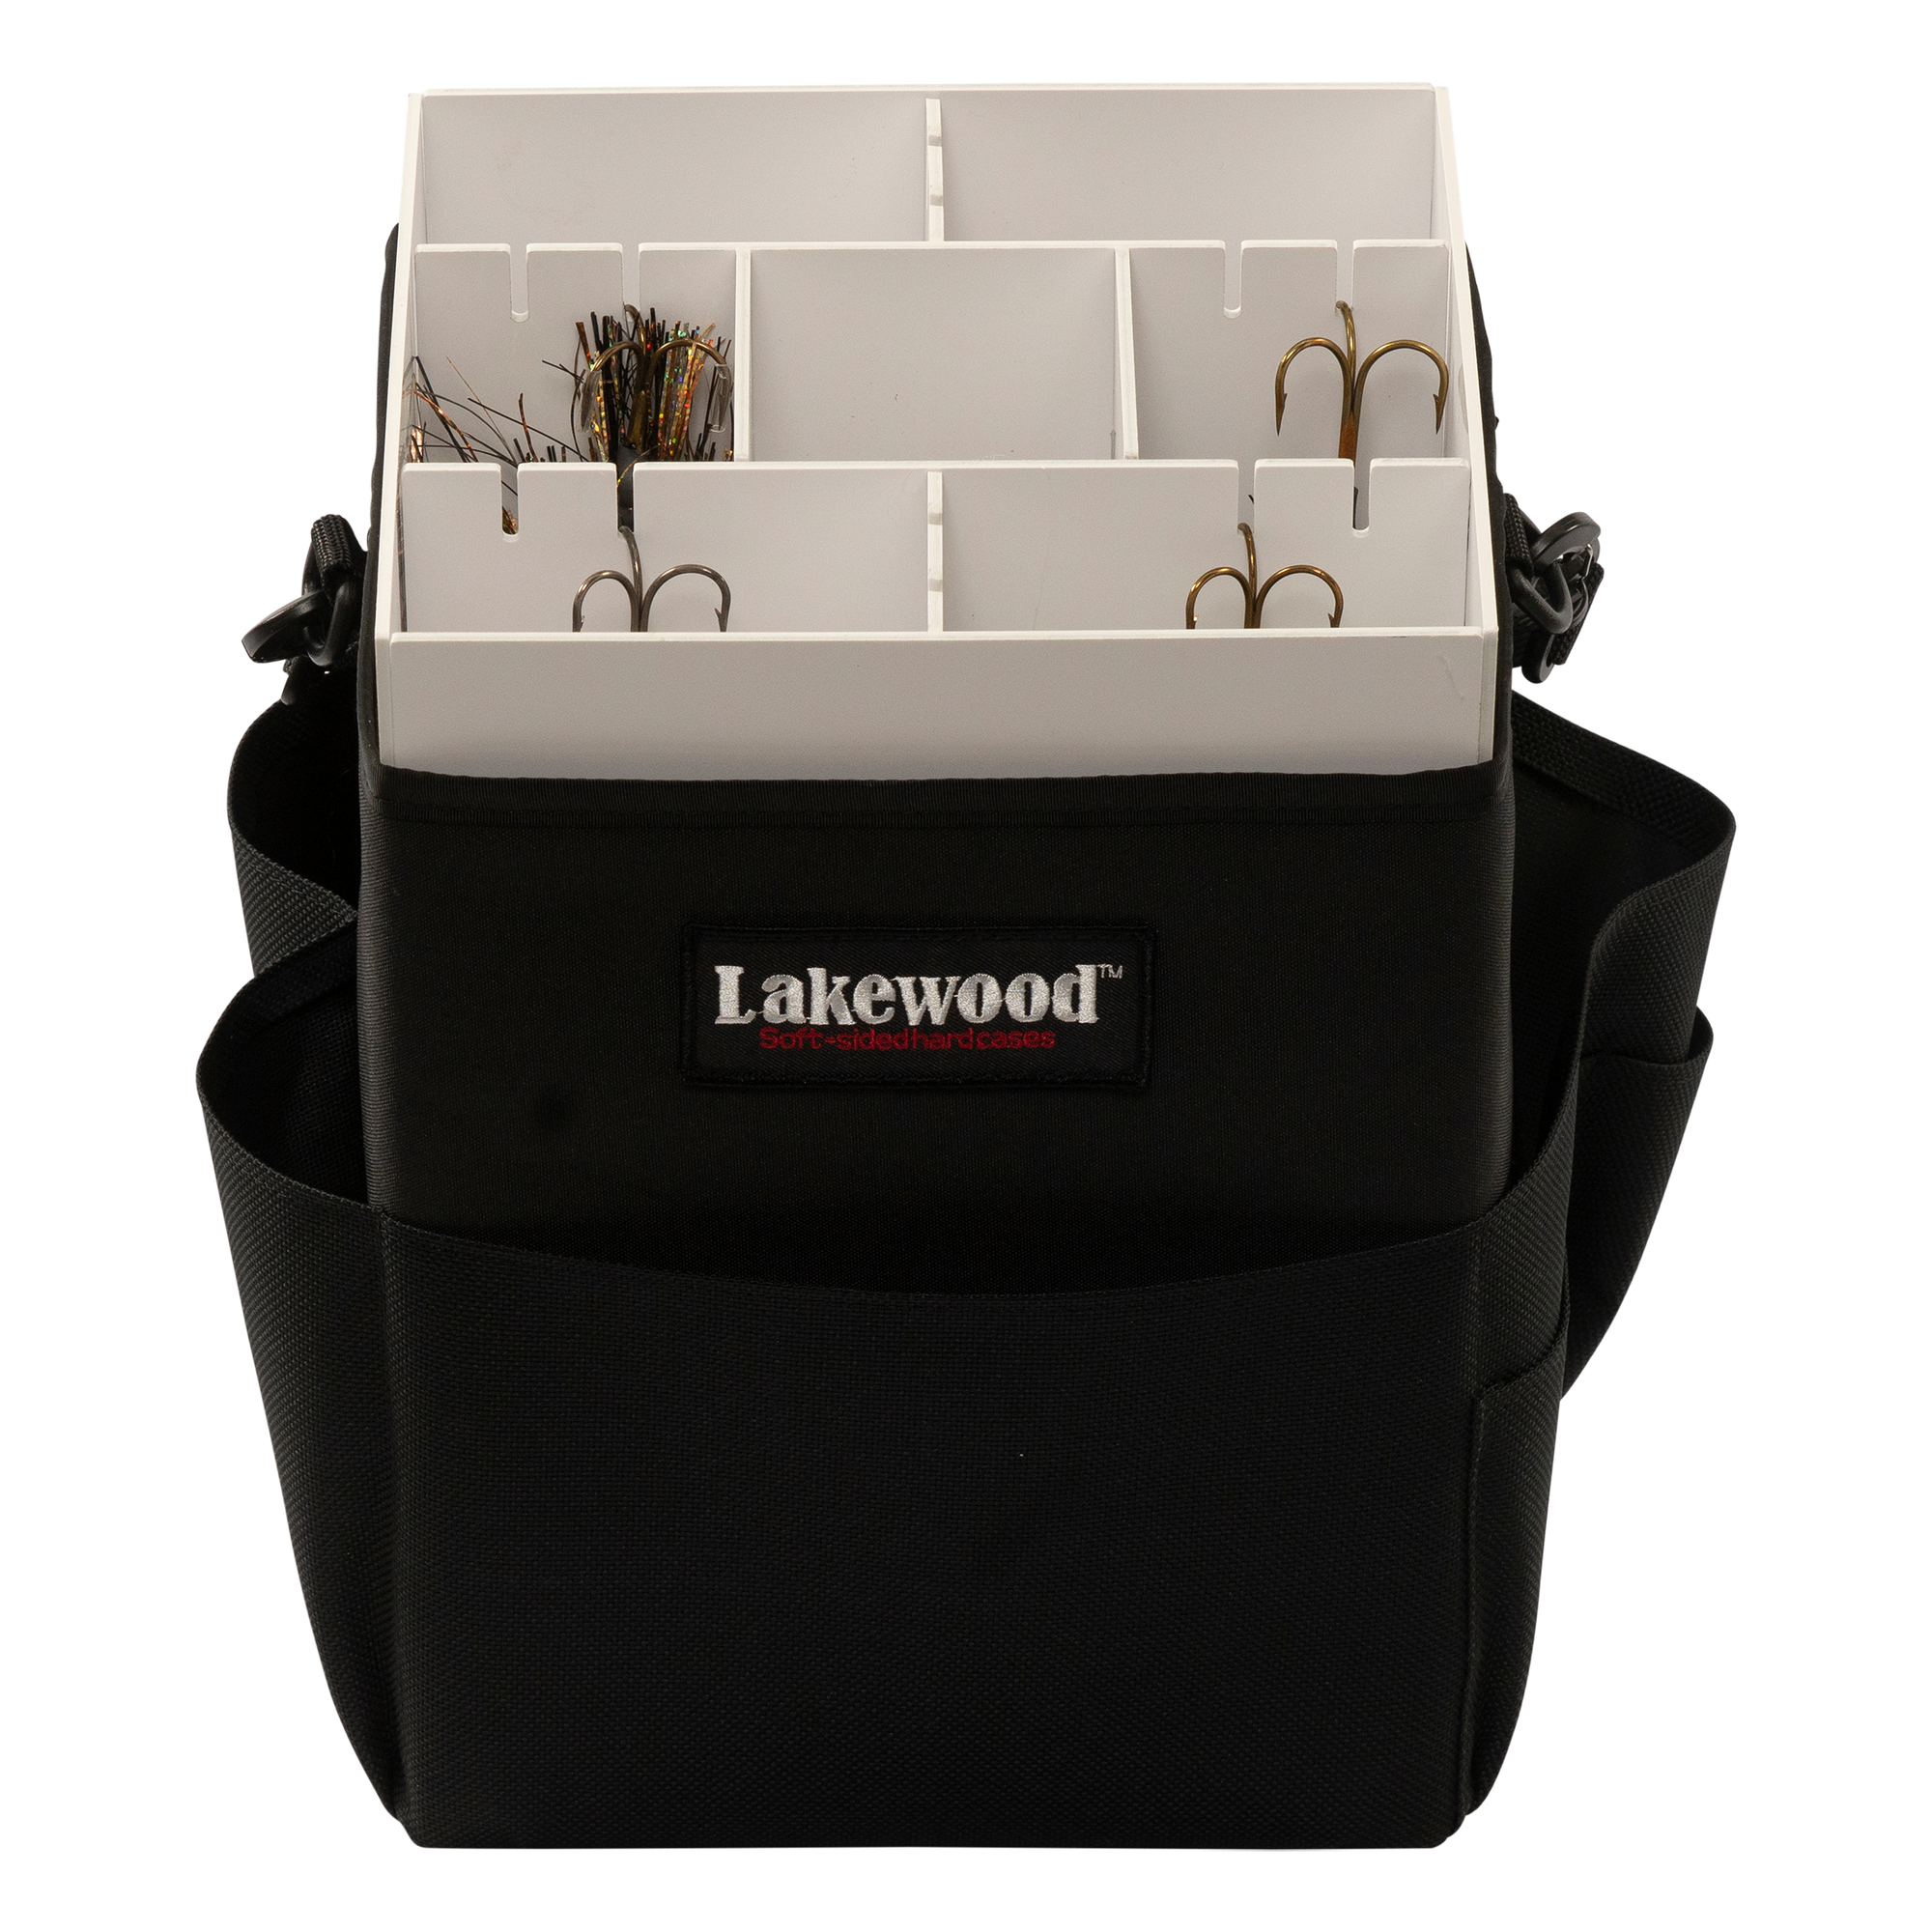 Lakewood Tackle Storage Solution for Musky/Pike goes right over your boat pedestal! Perfect for holding those larger bass swimbaits too! Easy/quick/convenient bait access. Made in the USA. Lifetime Warranty.